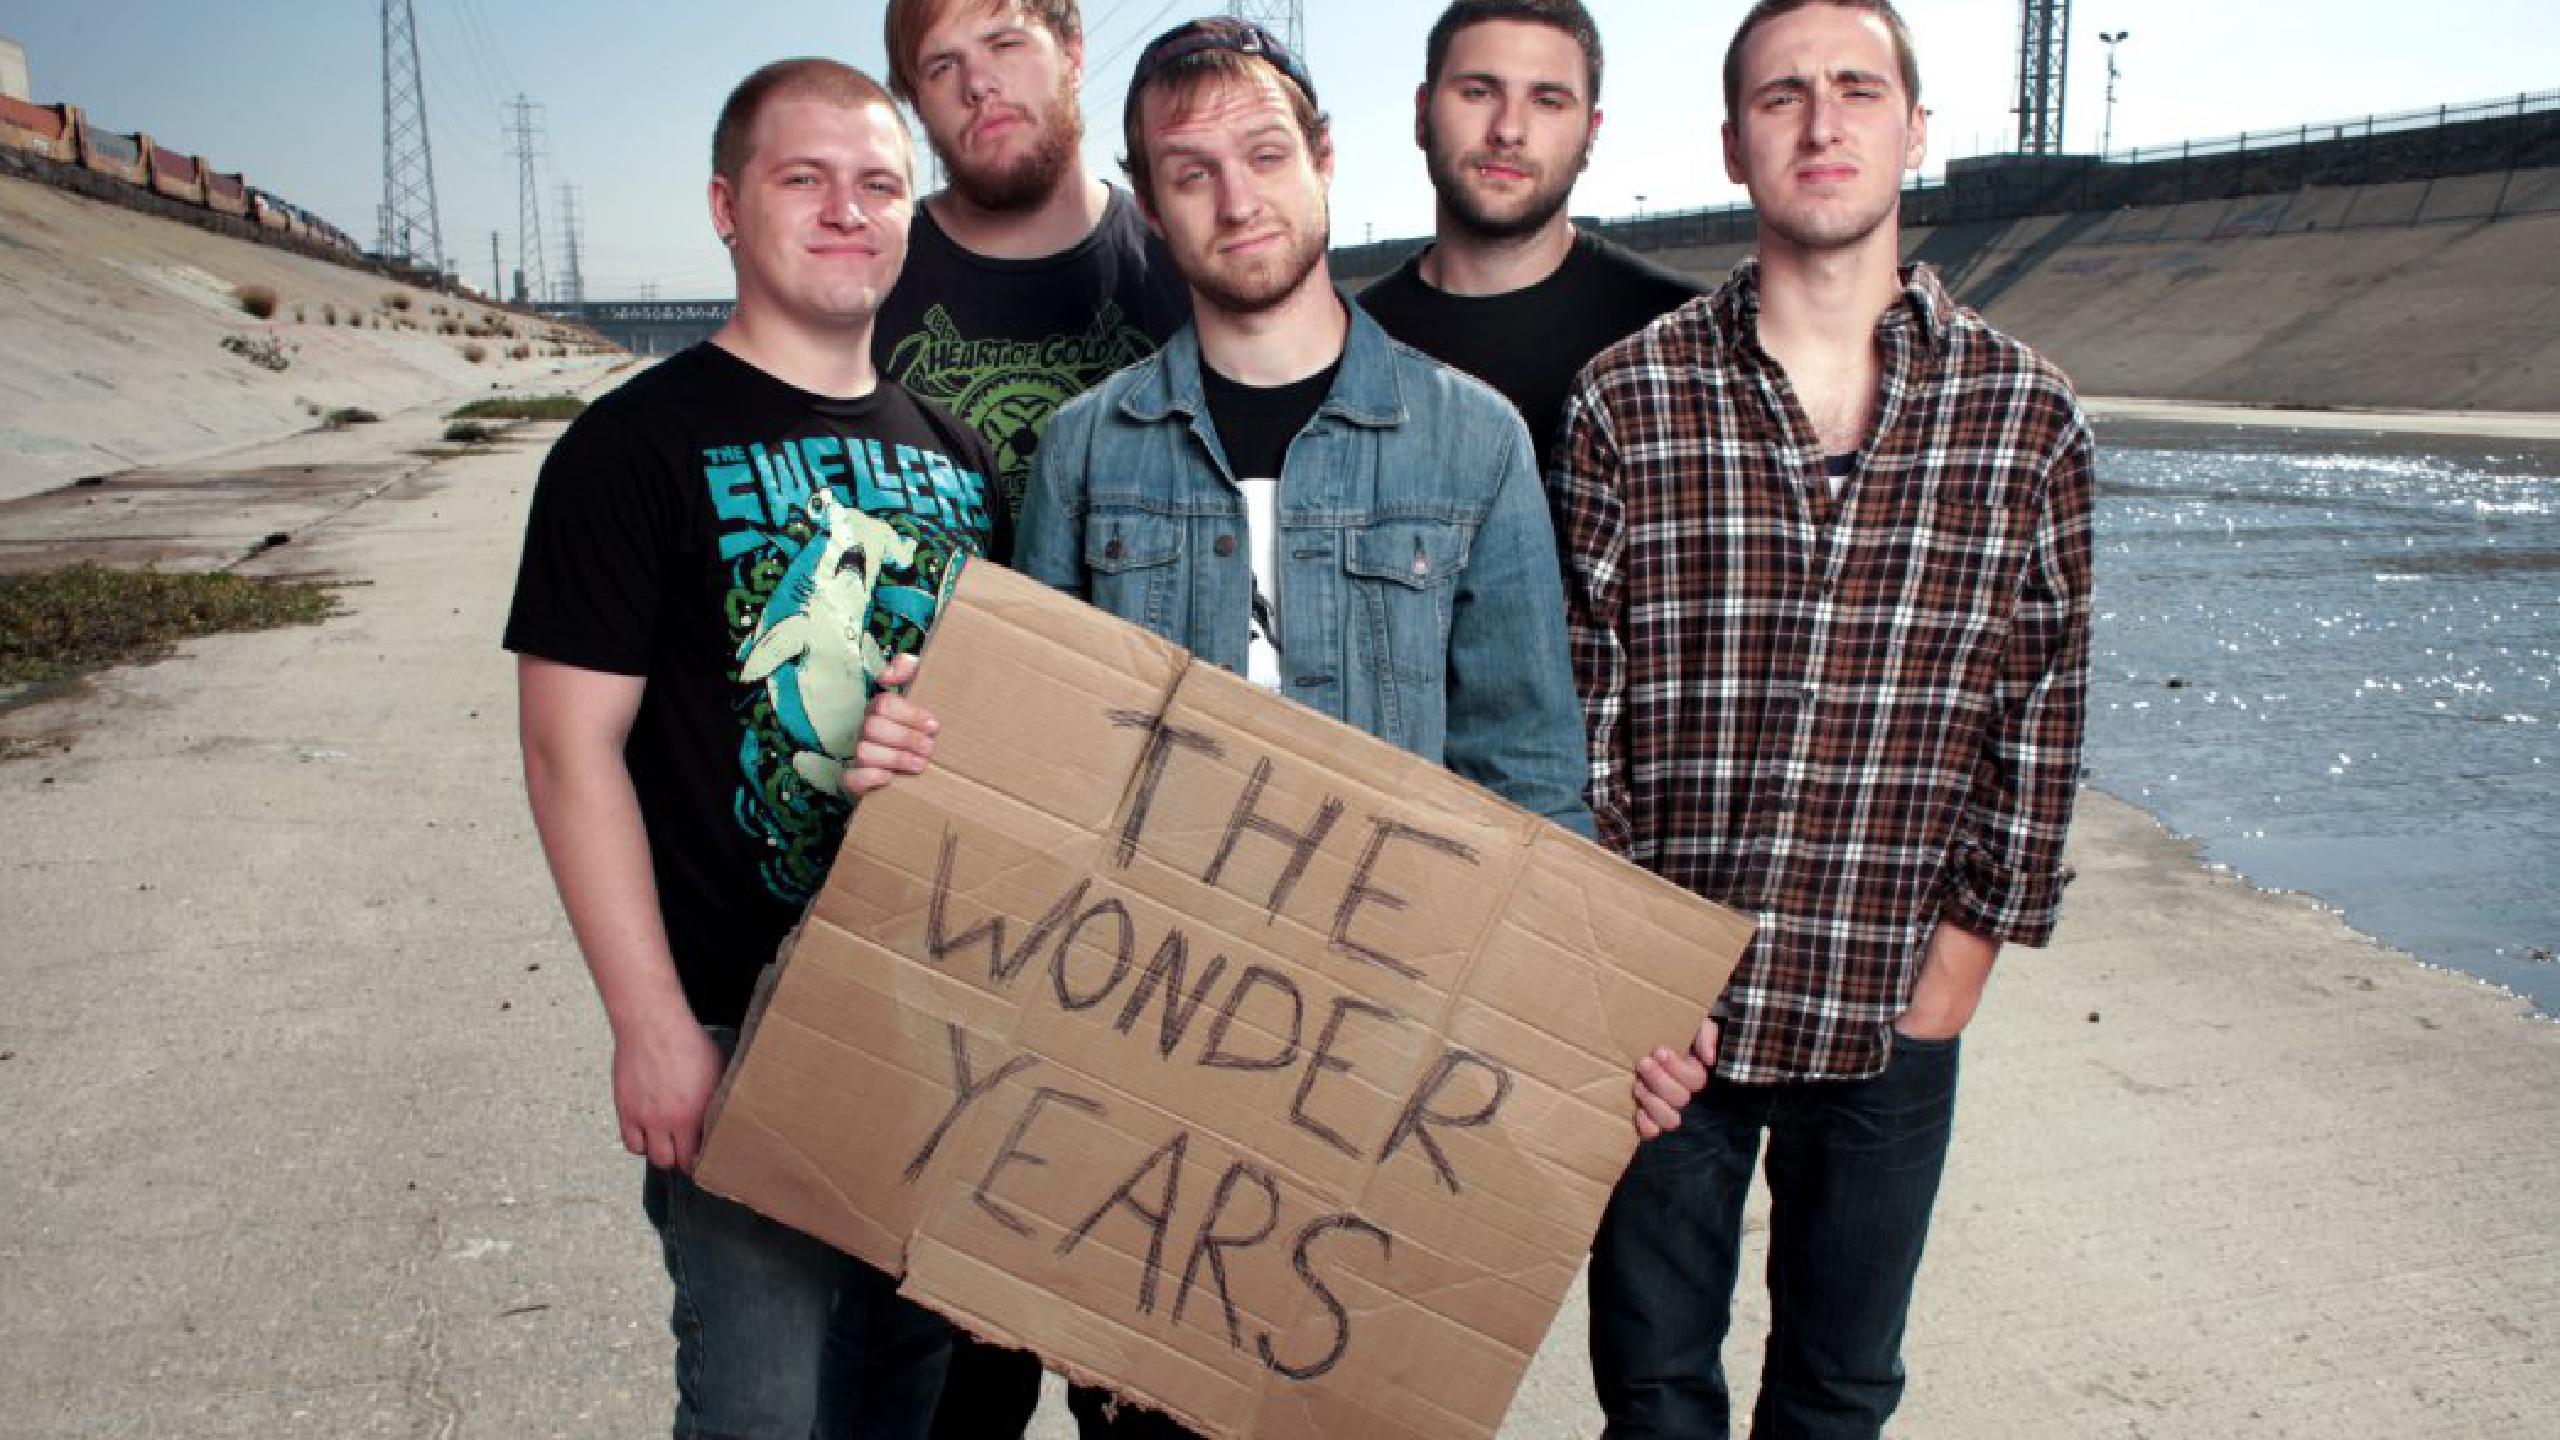 The Wonder Years tour dates 2022 2023. The Wonder Years tickets and